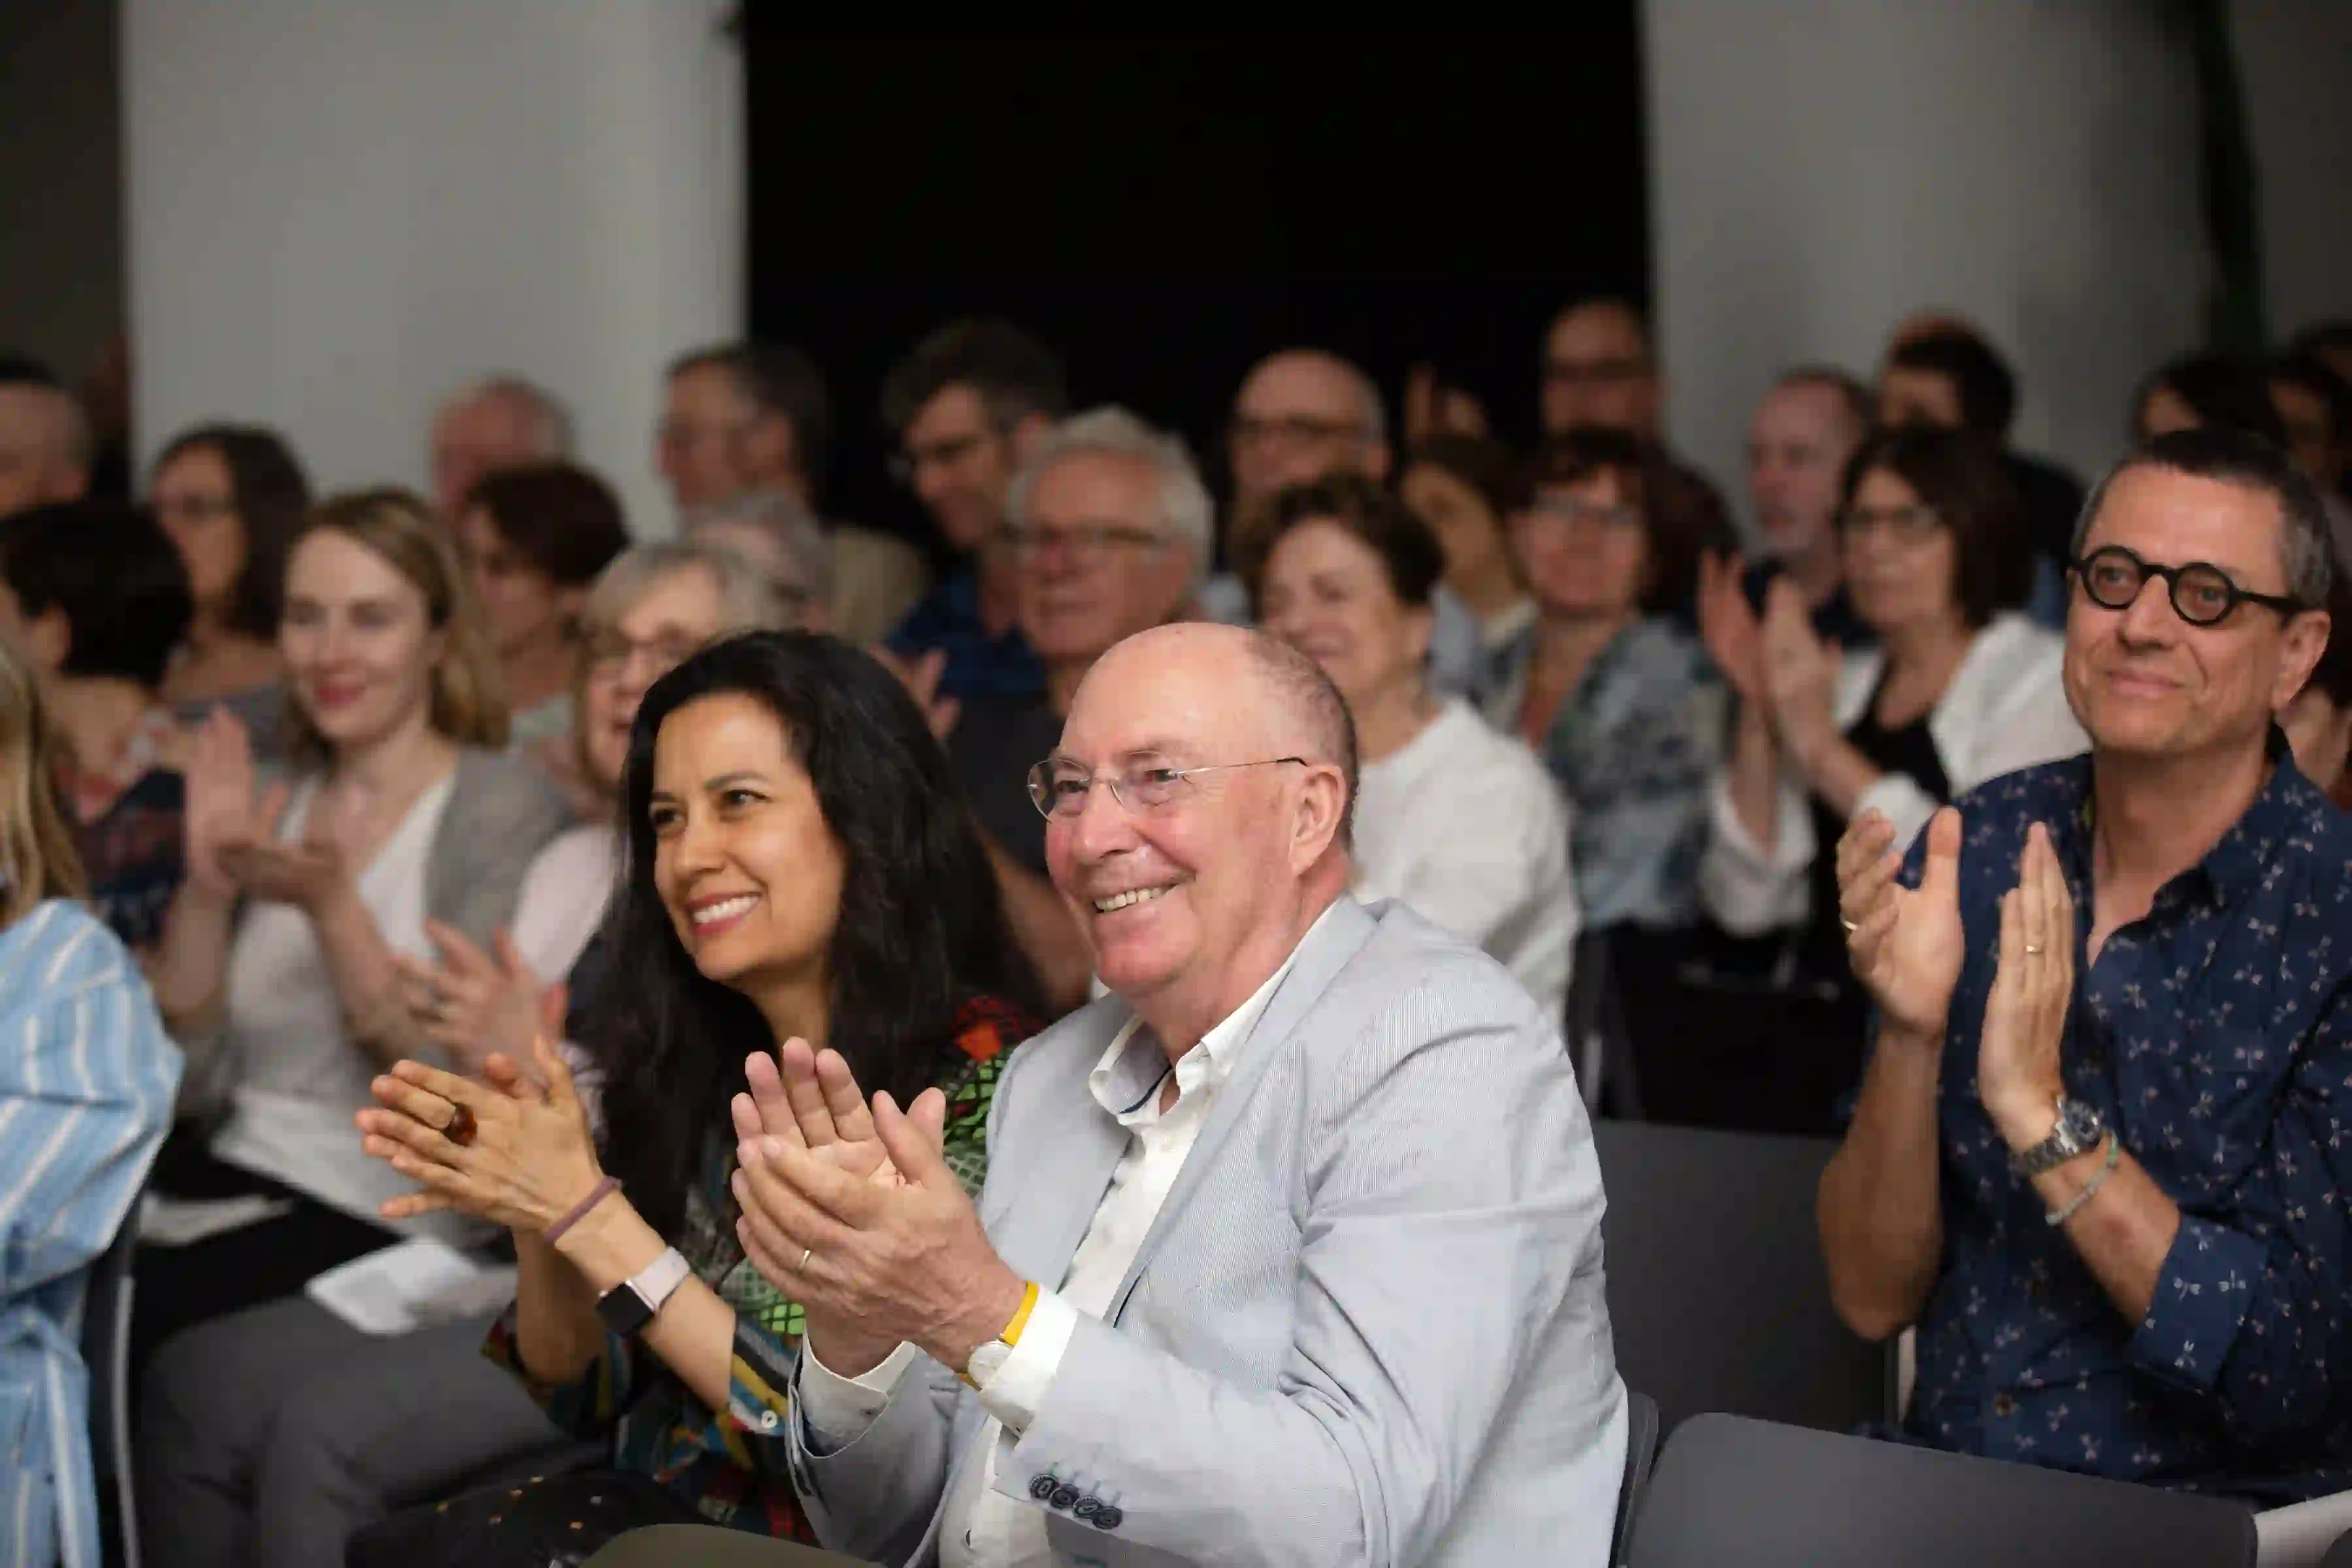 Attendees at Photo of Distinguished Professor at Hunter College and the Graduate Center, CUNY, Emily Braun's lecture, "Leaves of Grass, Clay, and Bronze: Giuseppe Penone and Walt Whitman," on June 1, 2019